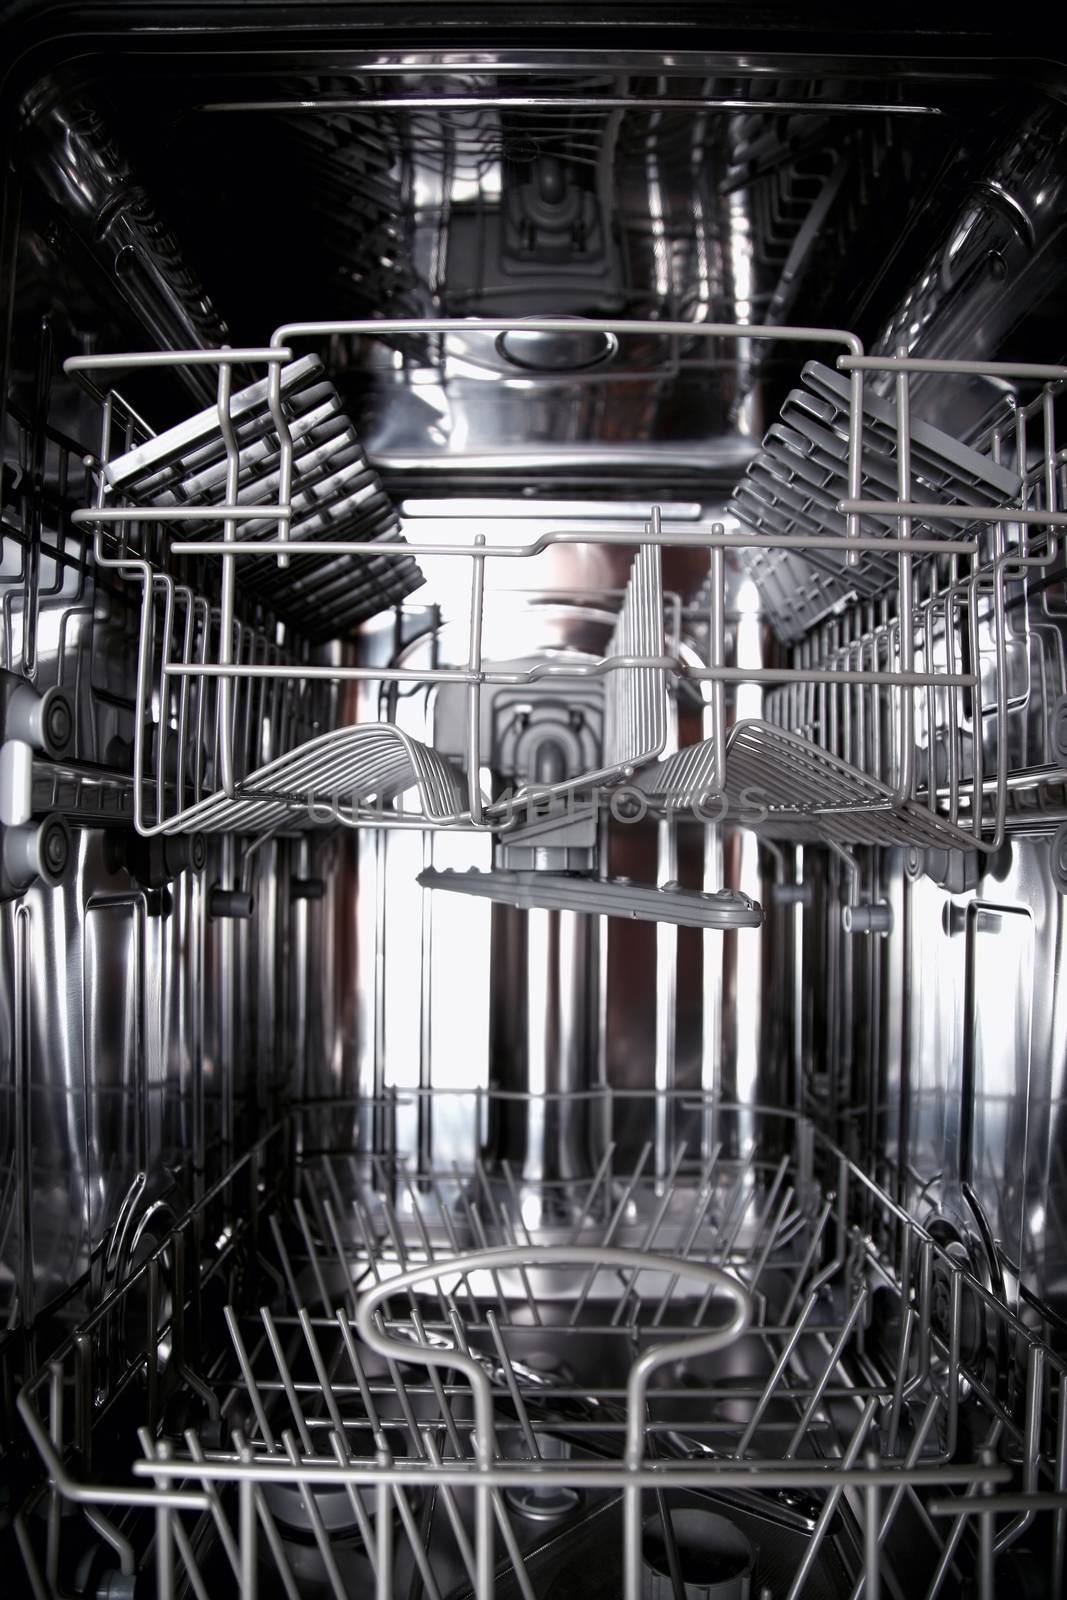 View of the interior of an empty opened dishwasher by vladacanon